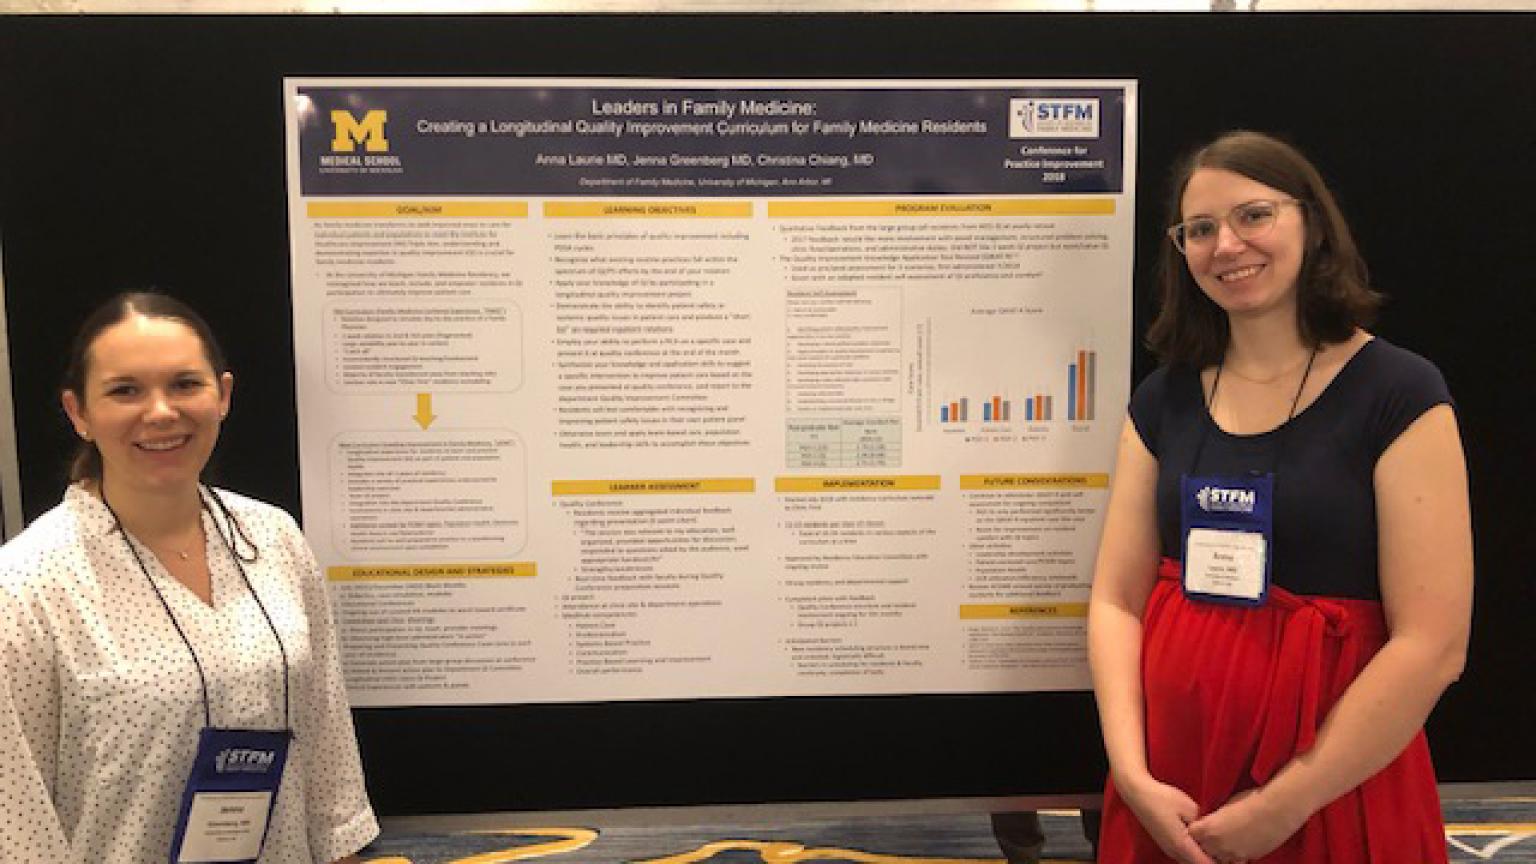 Jenna Greenberg and Anna Laurie stand on either side of a poster titled Leaders in Family Medicine: Creating a Longitudinal Quality Improvement Curriculum for Family Medicine Residents